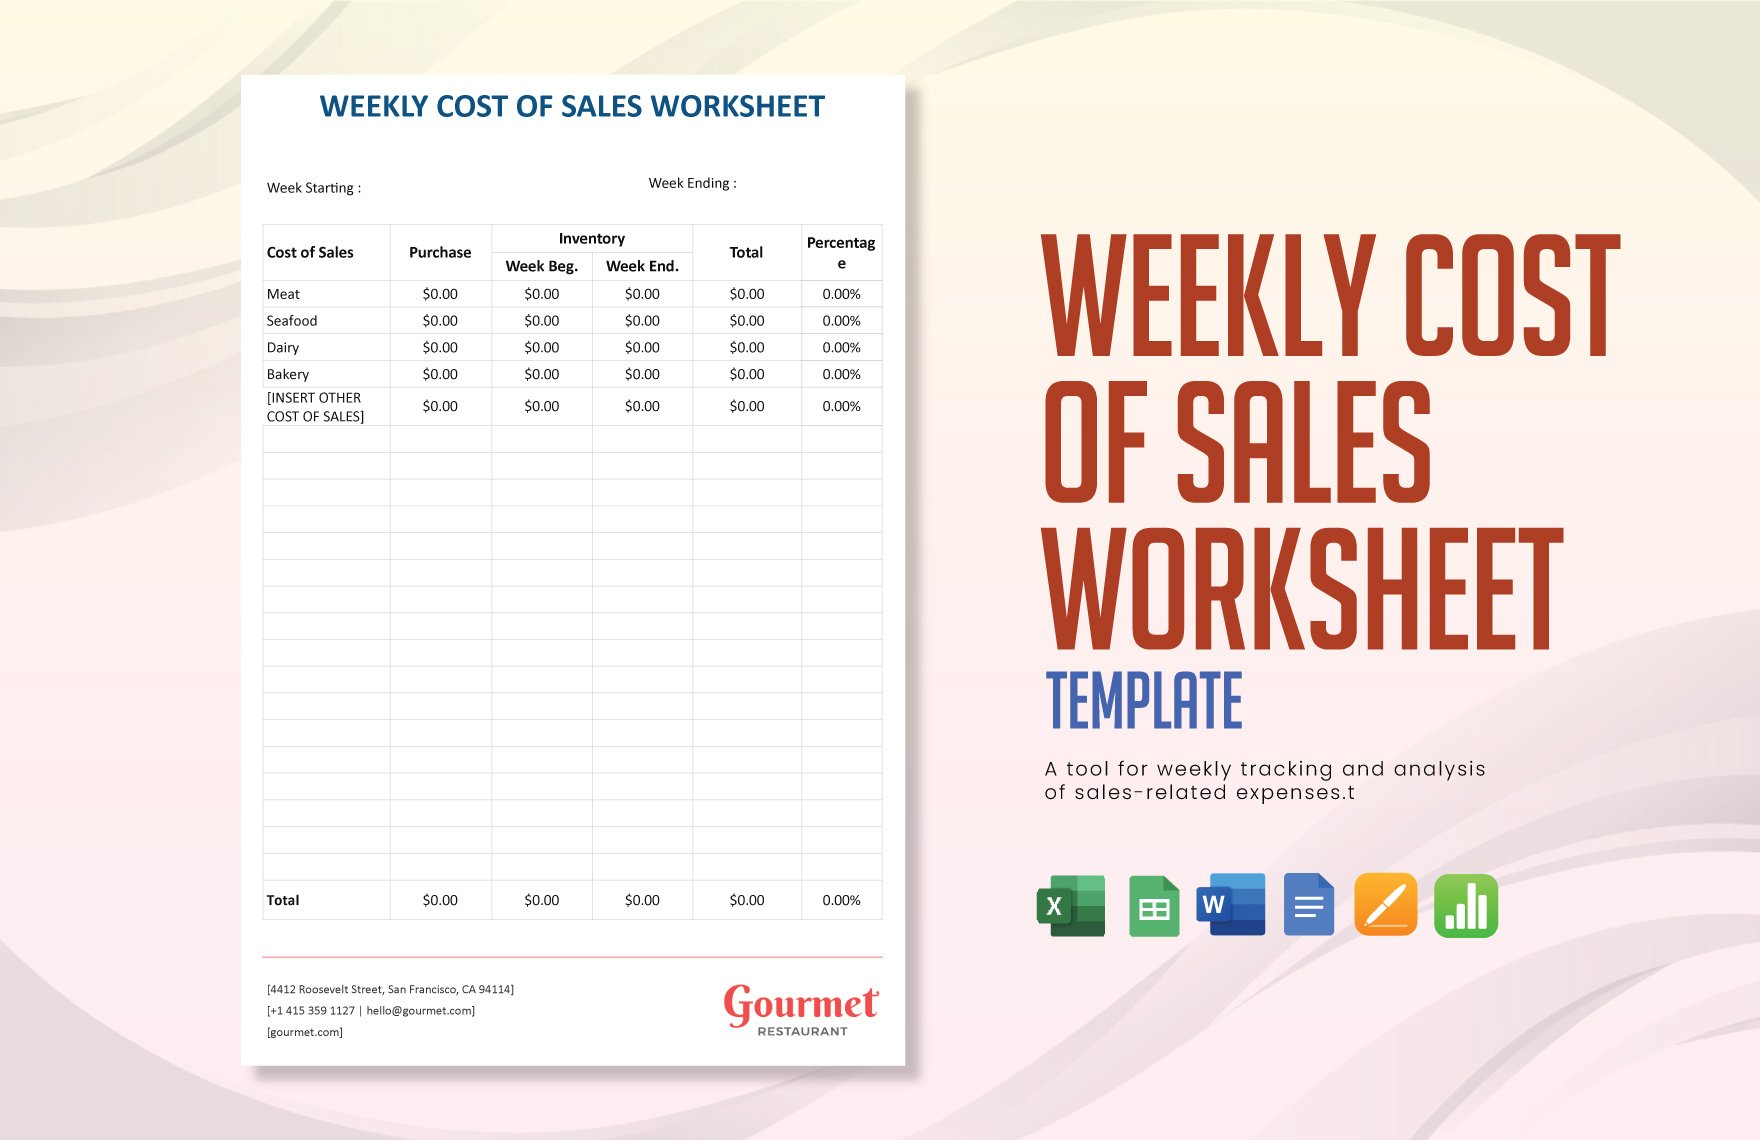 Weekly Cost of Sales Worksheet Template in Word, Google Docs, Excel, Google Sheets, Apple Pages, Apple Numbers